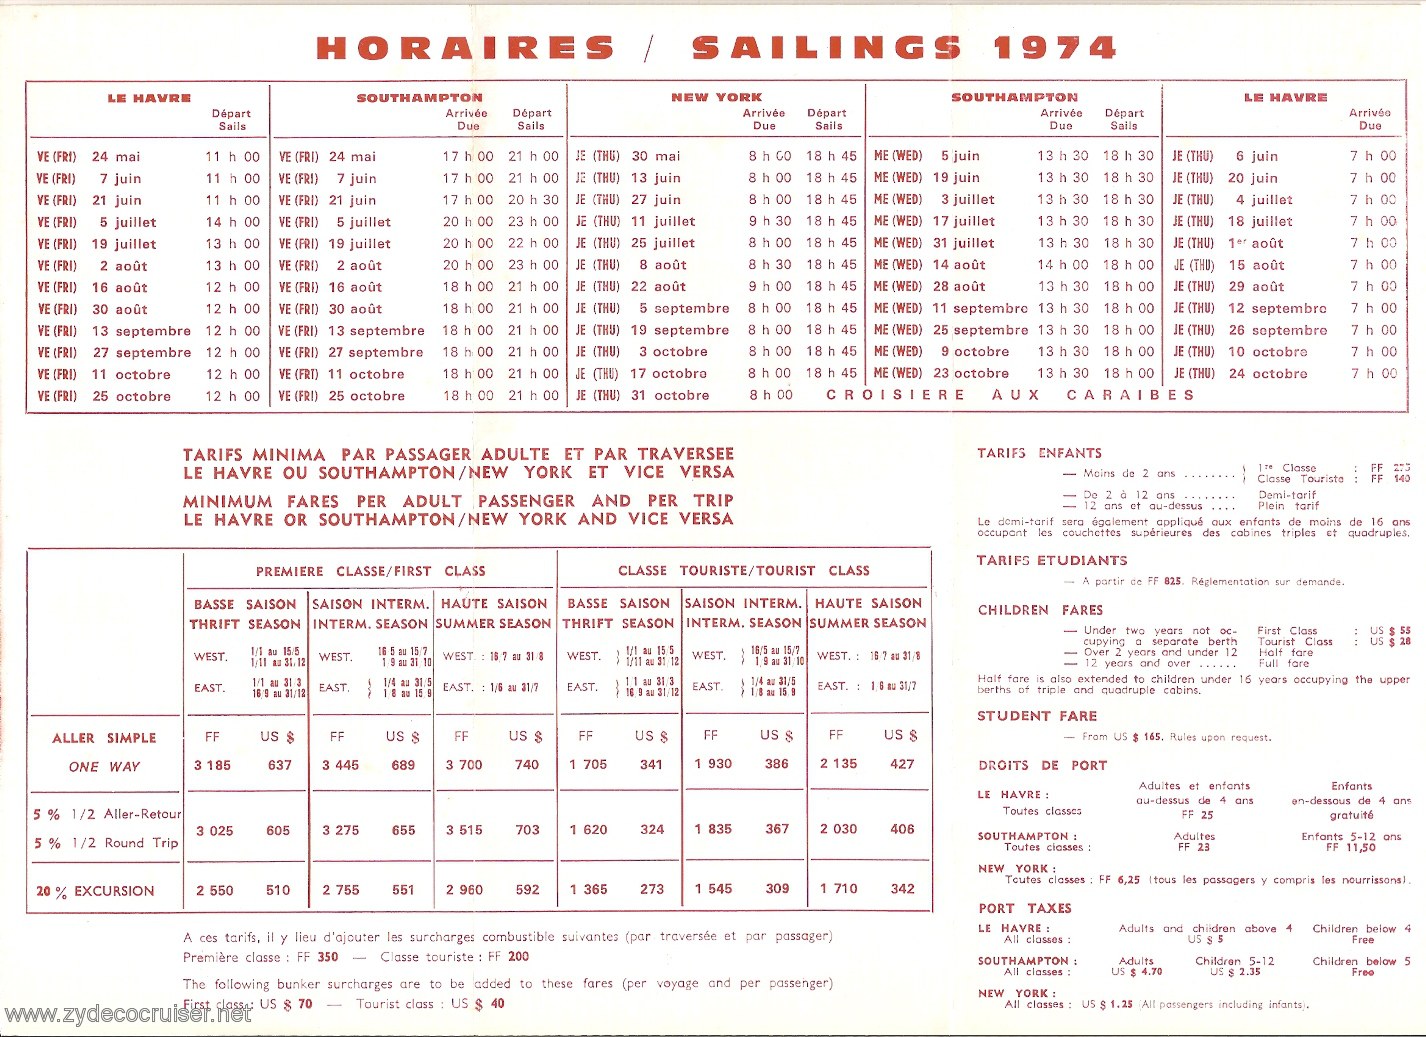 SS France, French Line, Sailings and Minimum Fares, Side 2, 1974